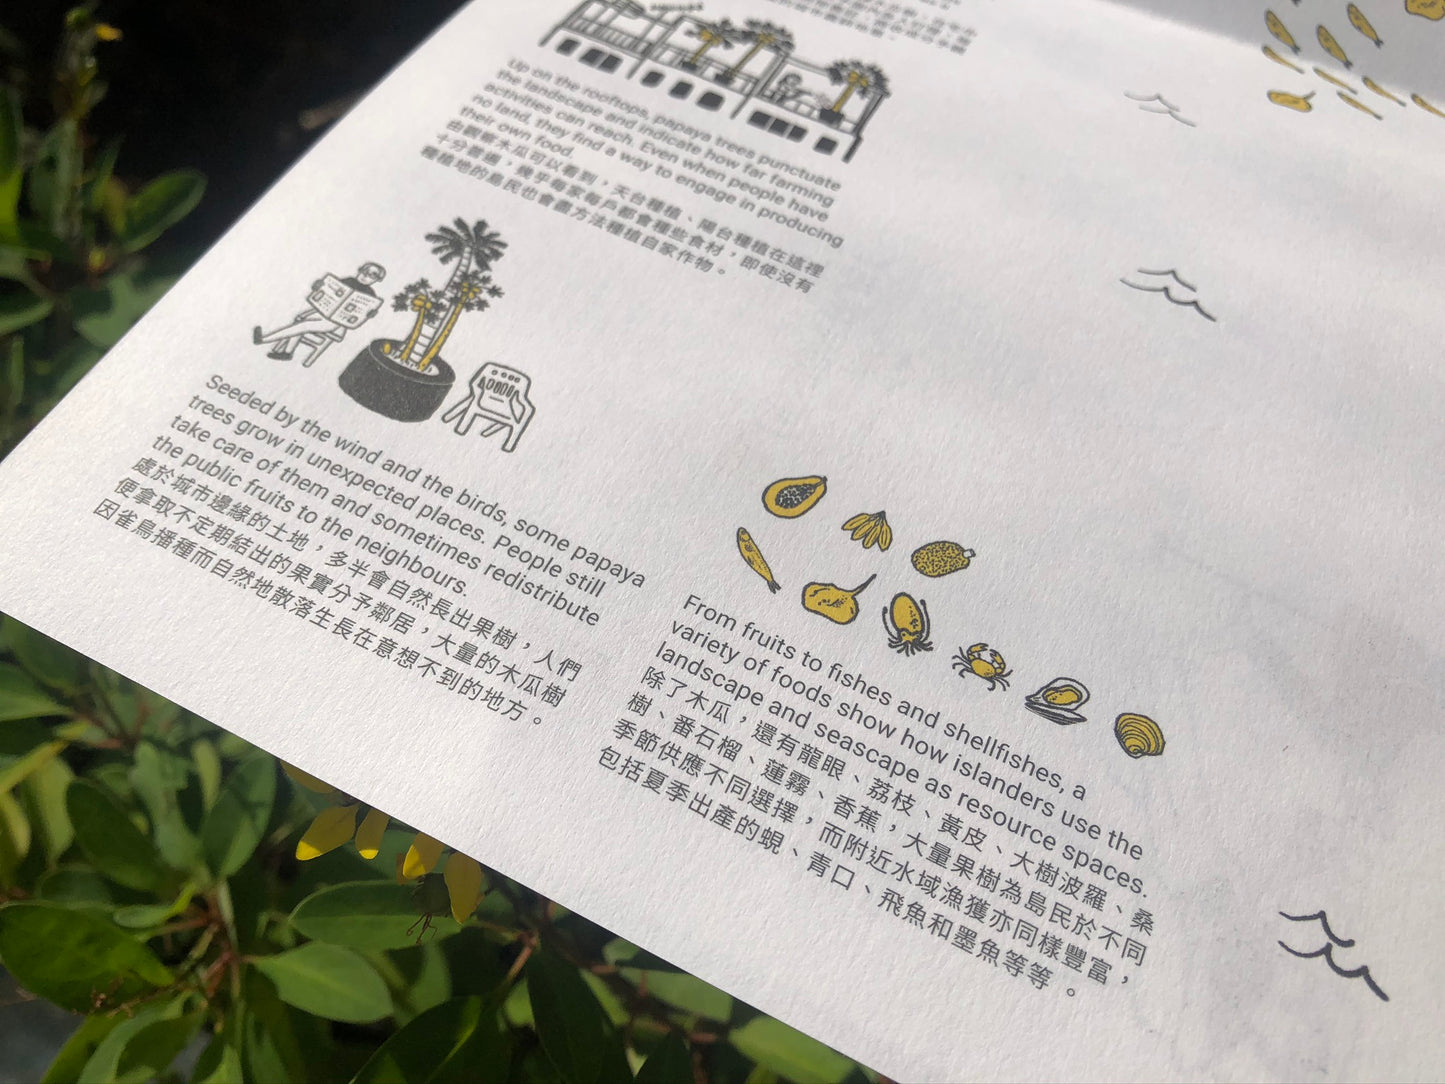 ISSUE #02 NOURISHING LAND 「豐饒之地」